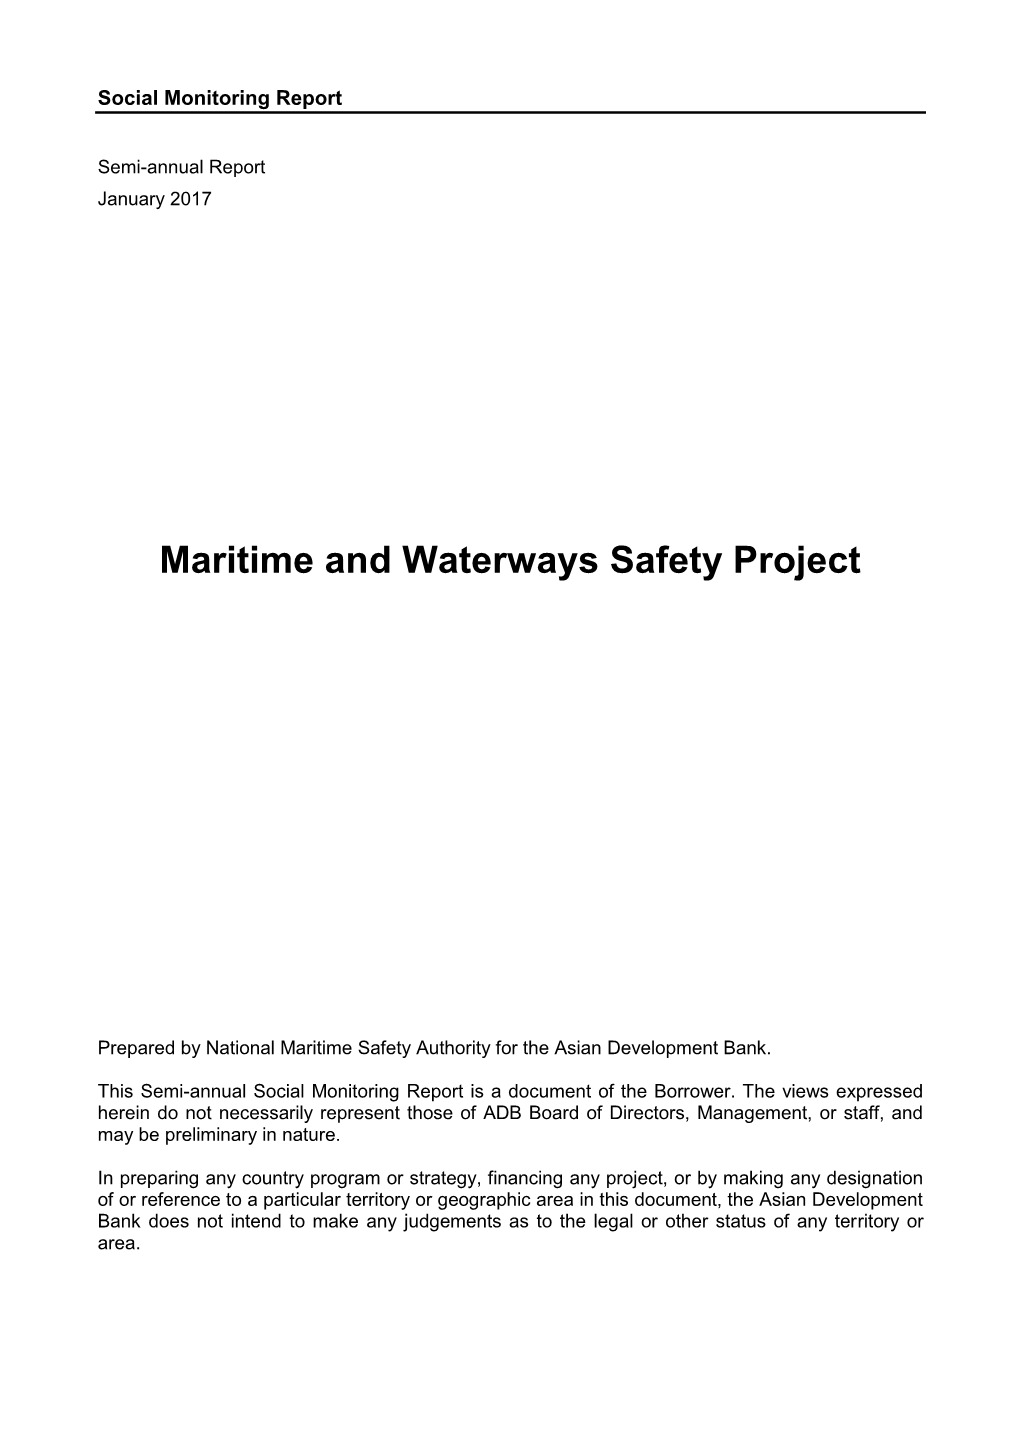 Maritime and Waterways Safety Project